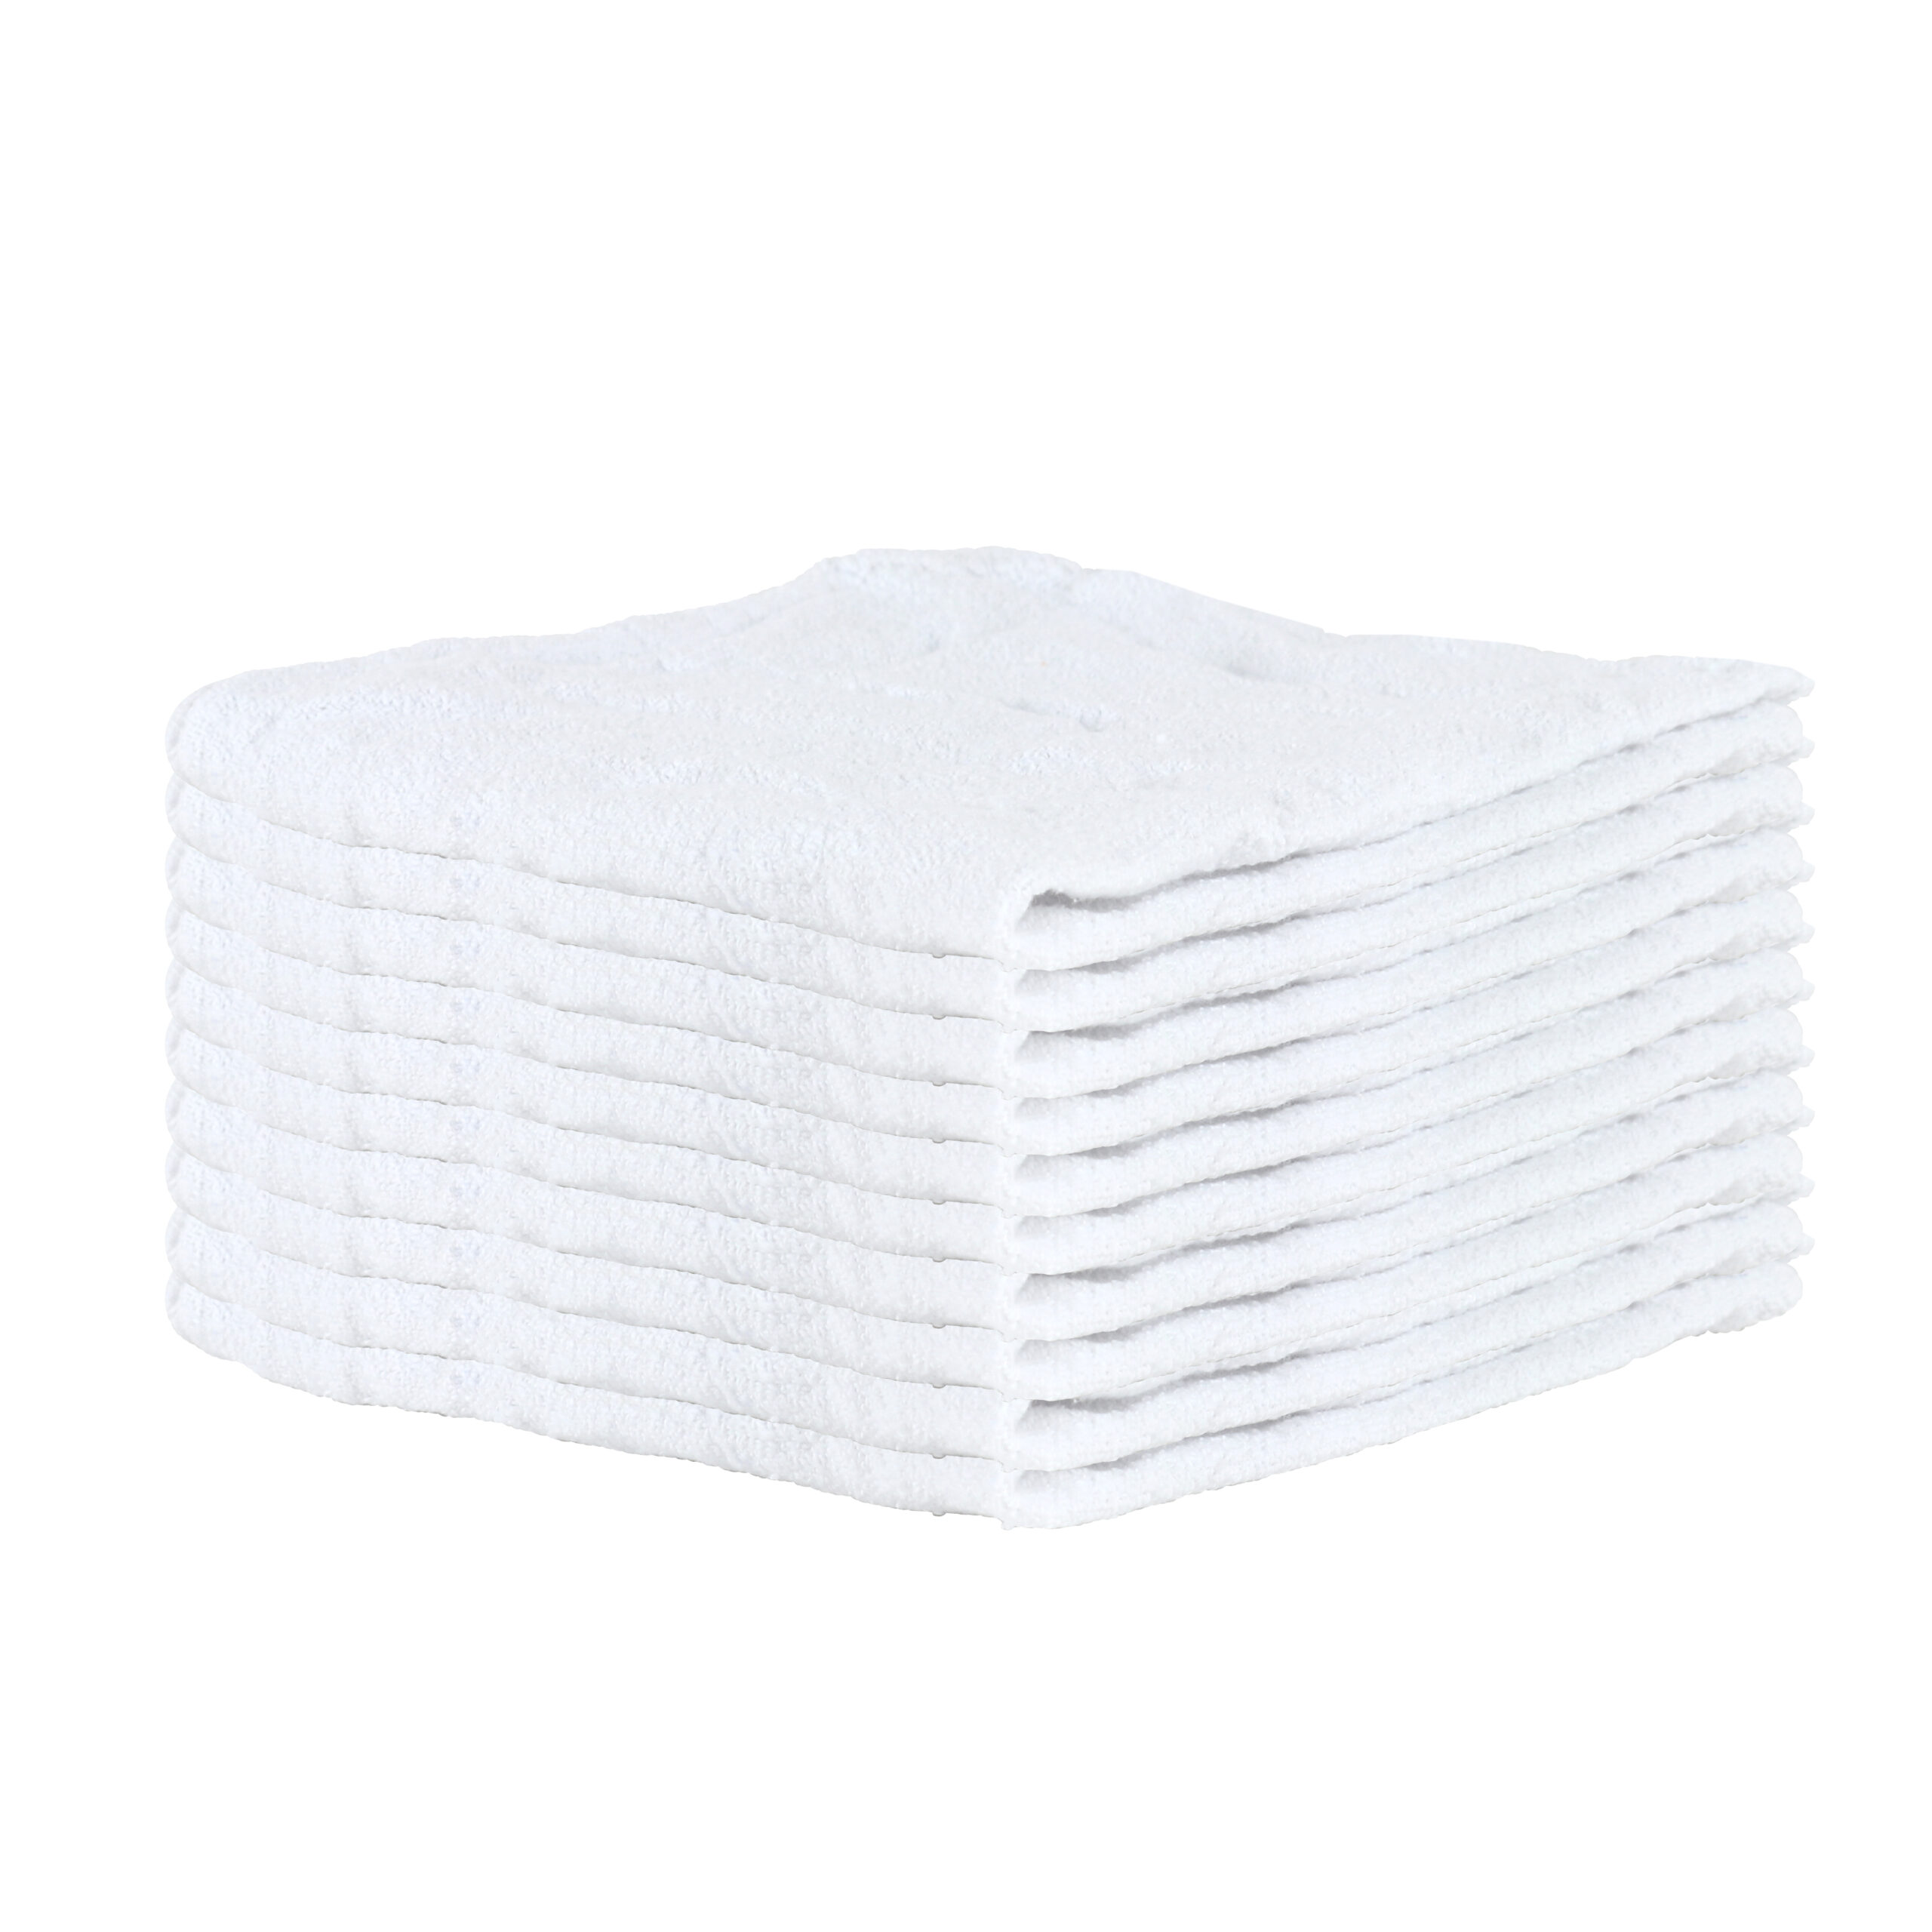 1000 New Industrial Shop Rags Cleaning Towels White Large 12x14 Towel B-Grade 